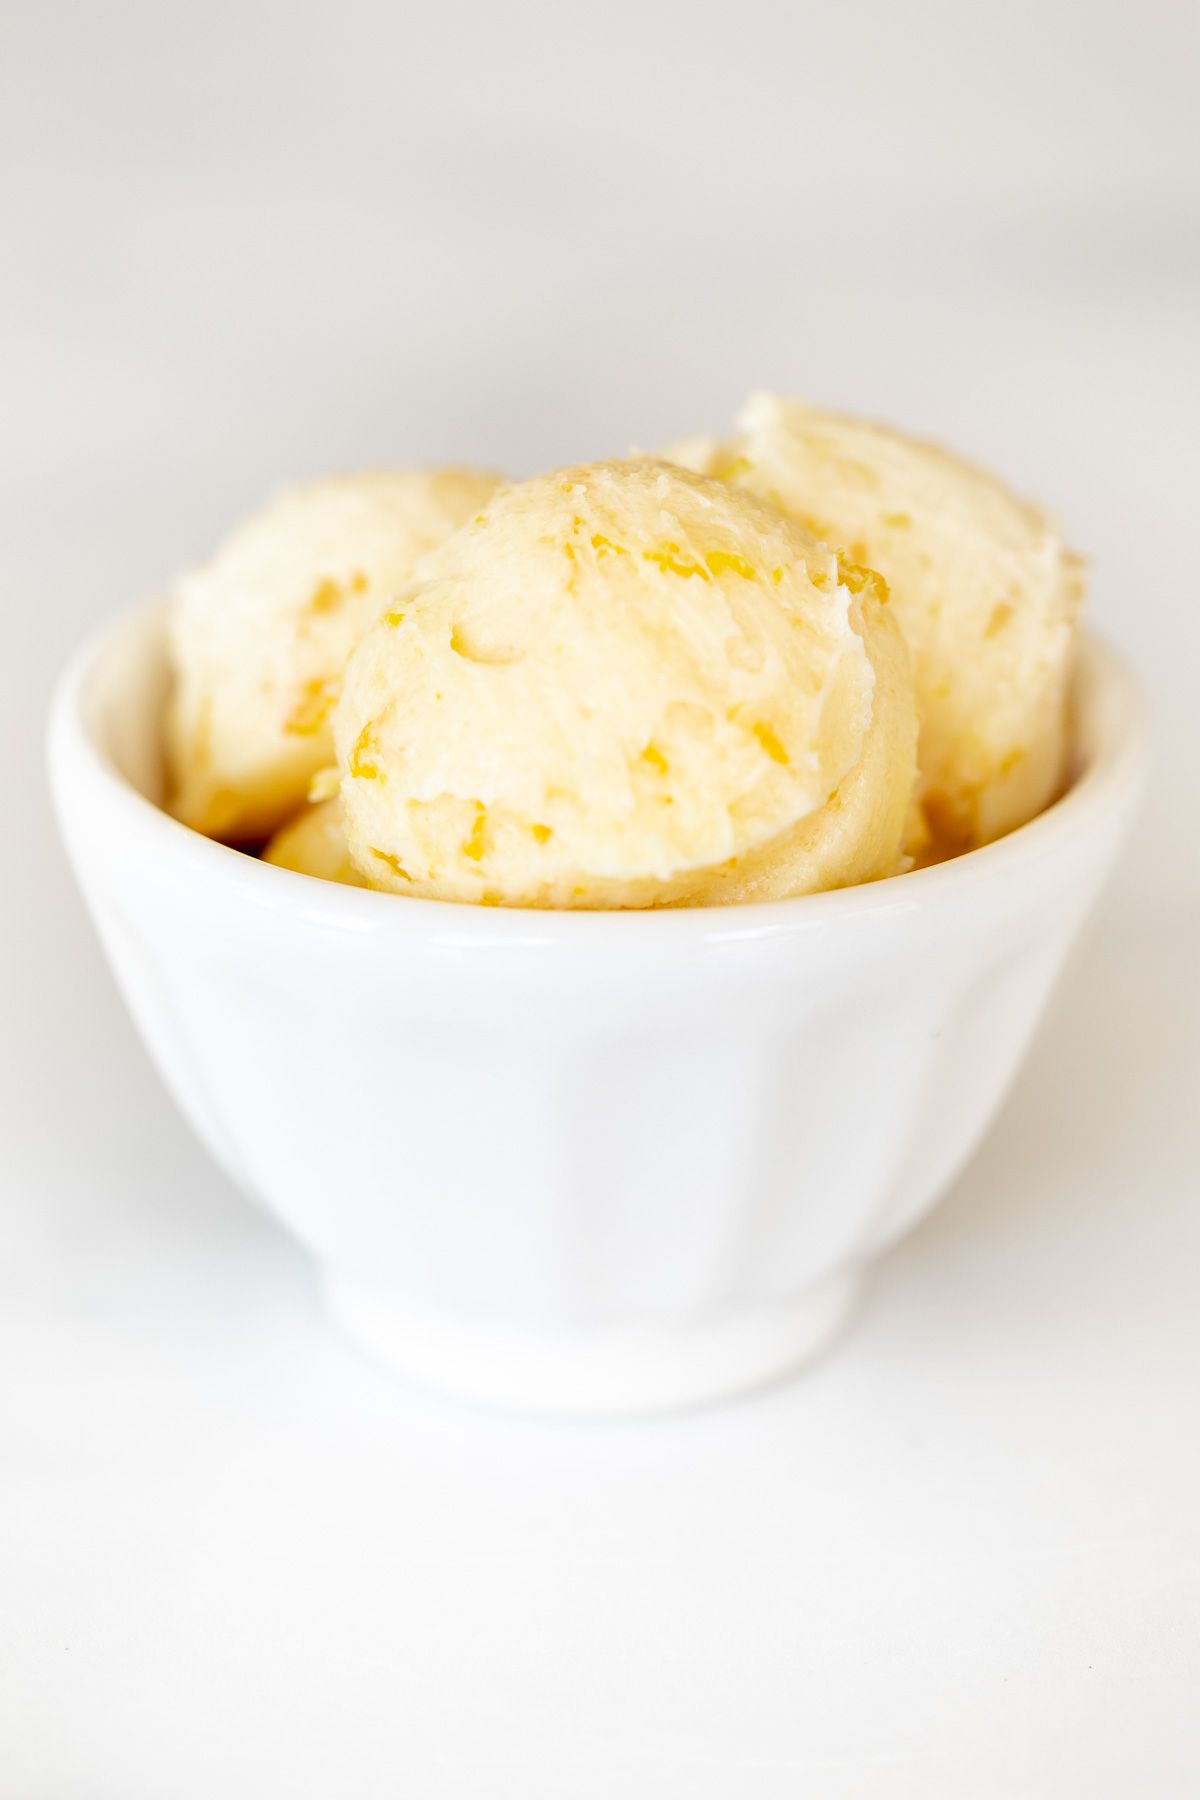 A white bowl filled with scoops of homemade orange butter.